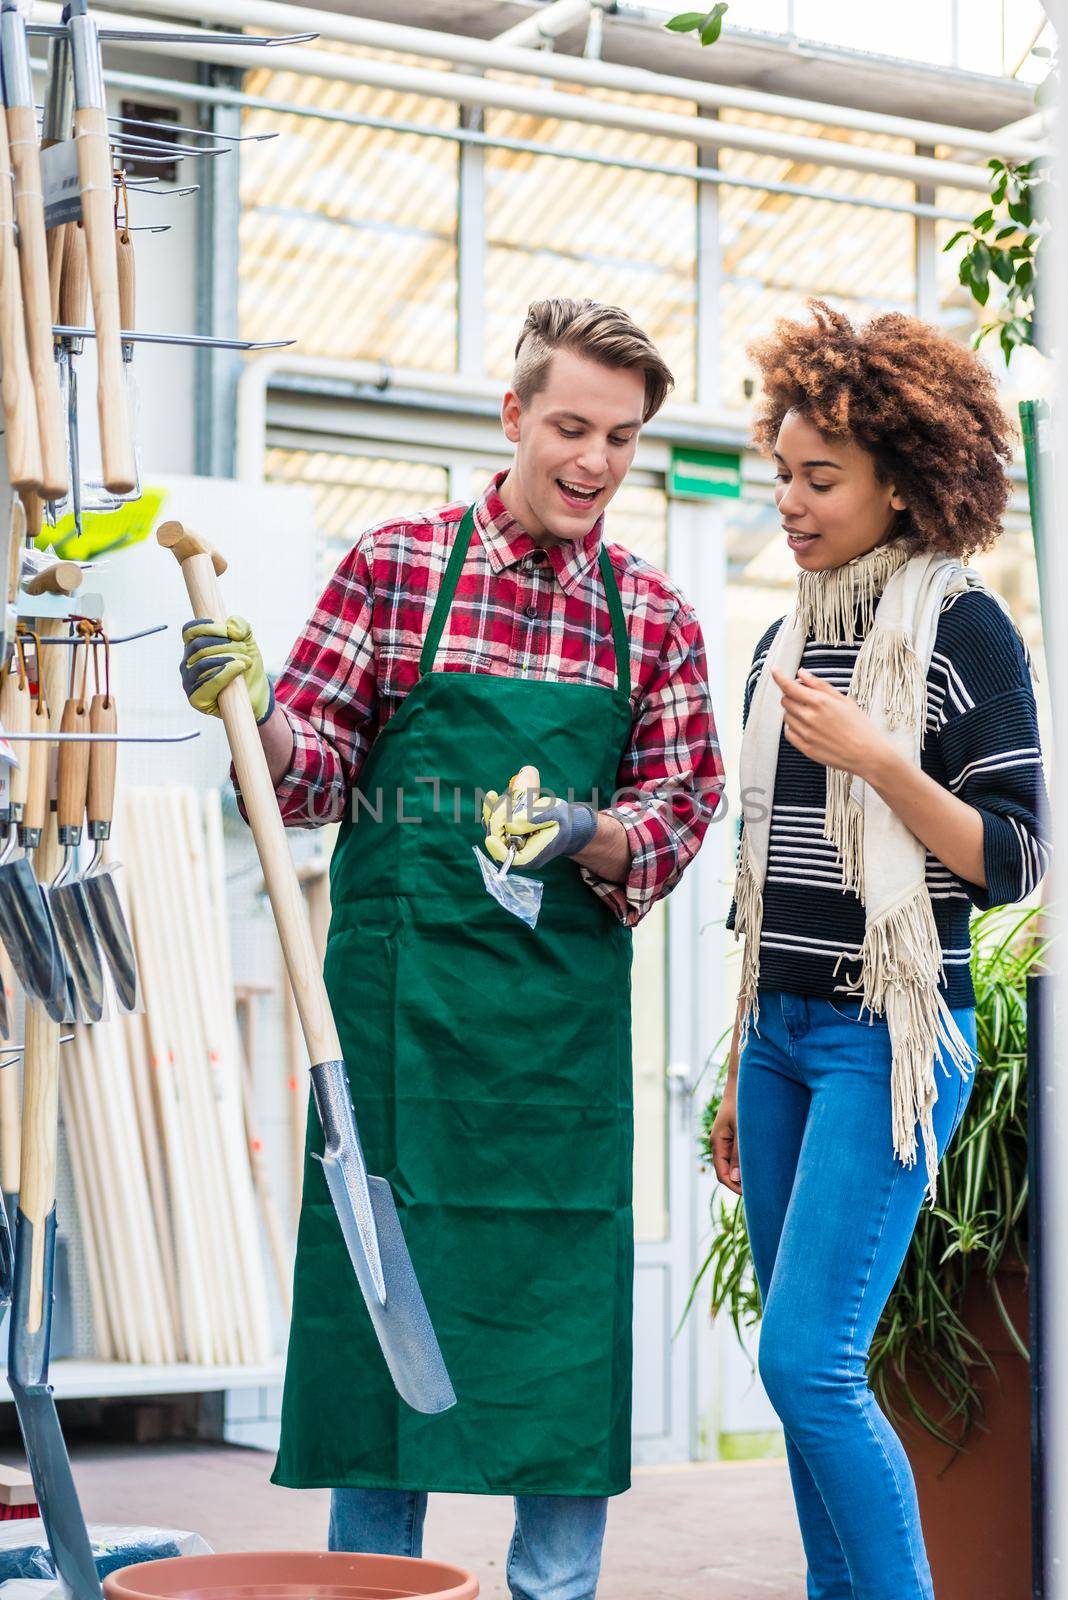 Handsome and cheerful worker wearing a green apron while helping a customer with choosing a gardening tool in a modern flower shop